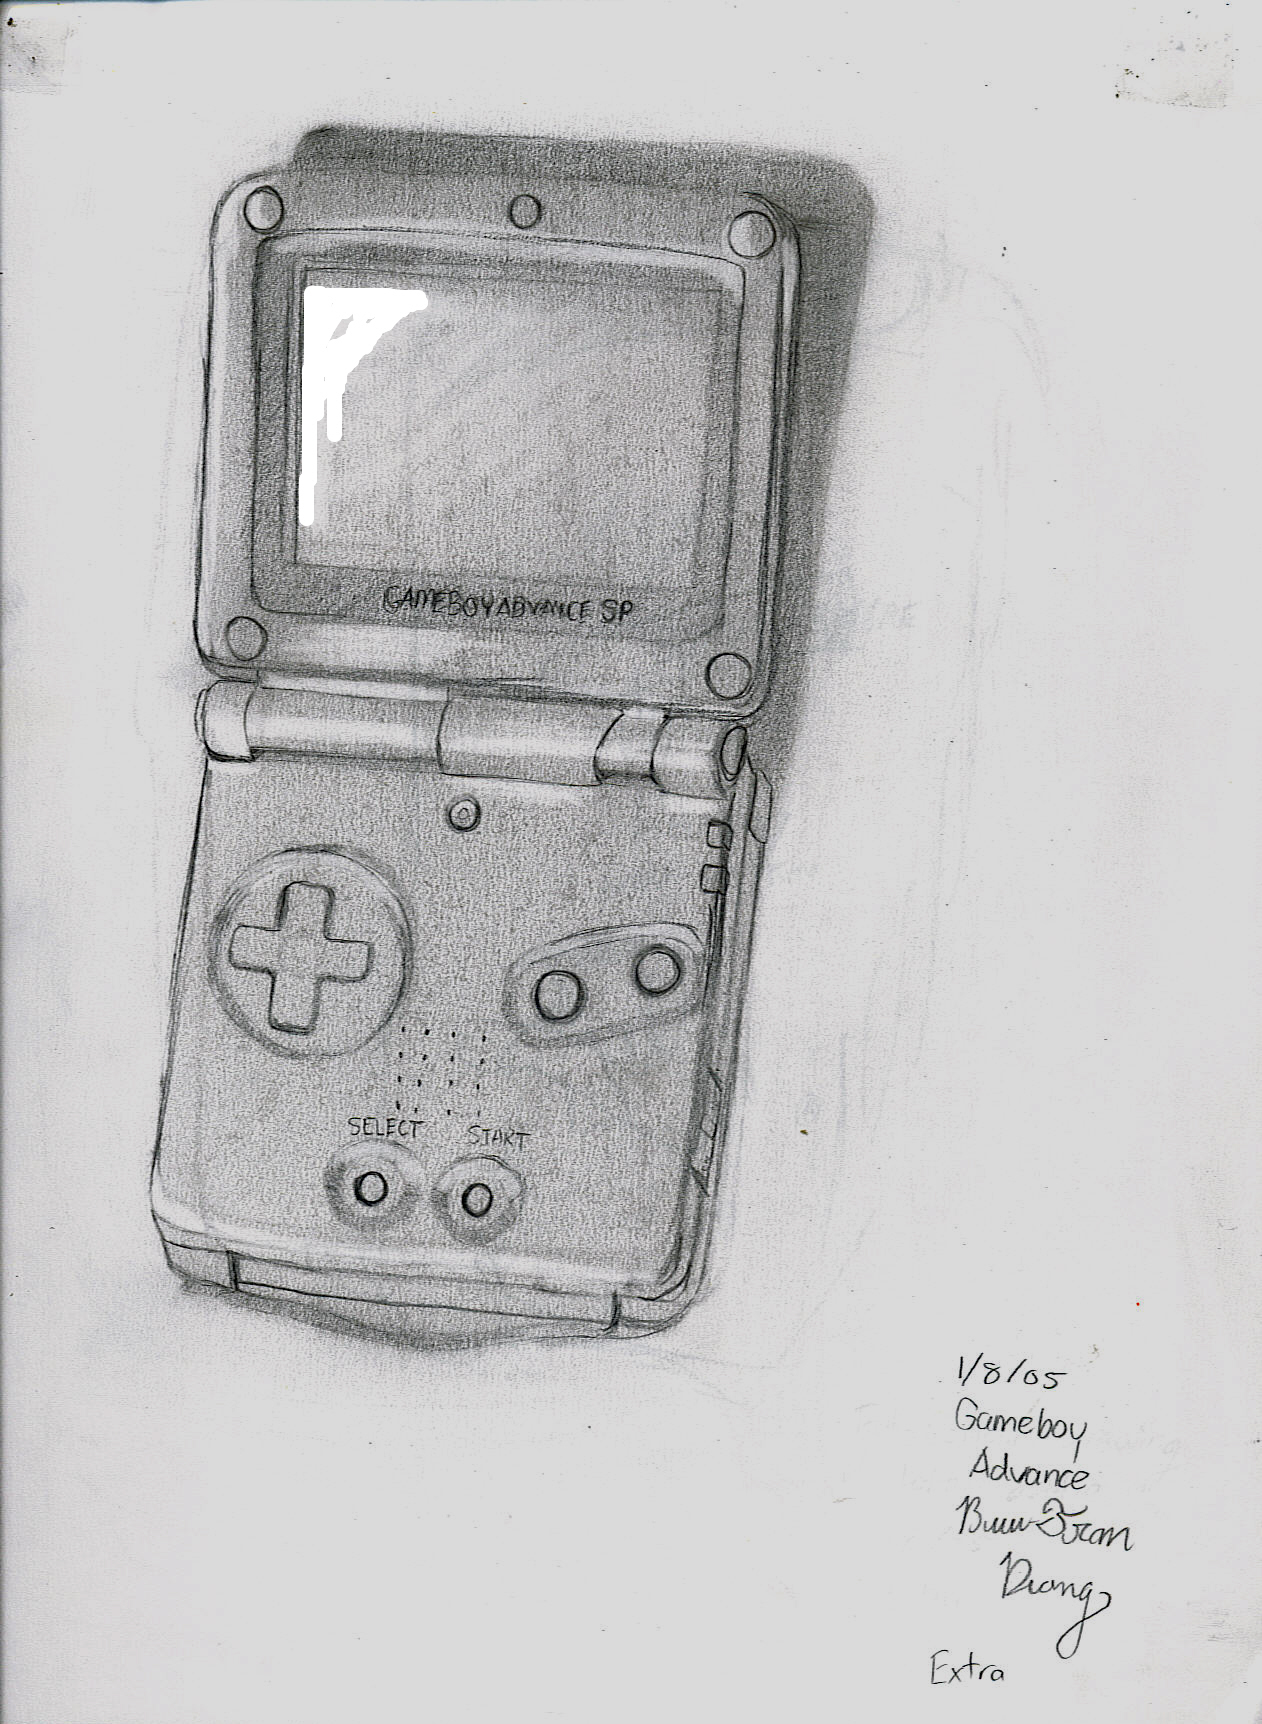 Gameboy Advanced by luckylace222